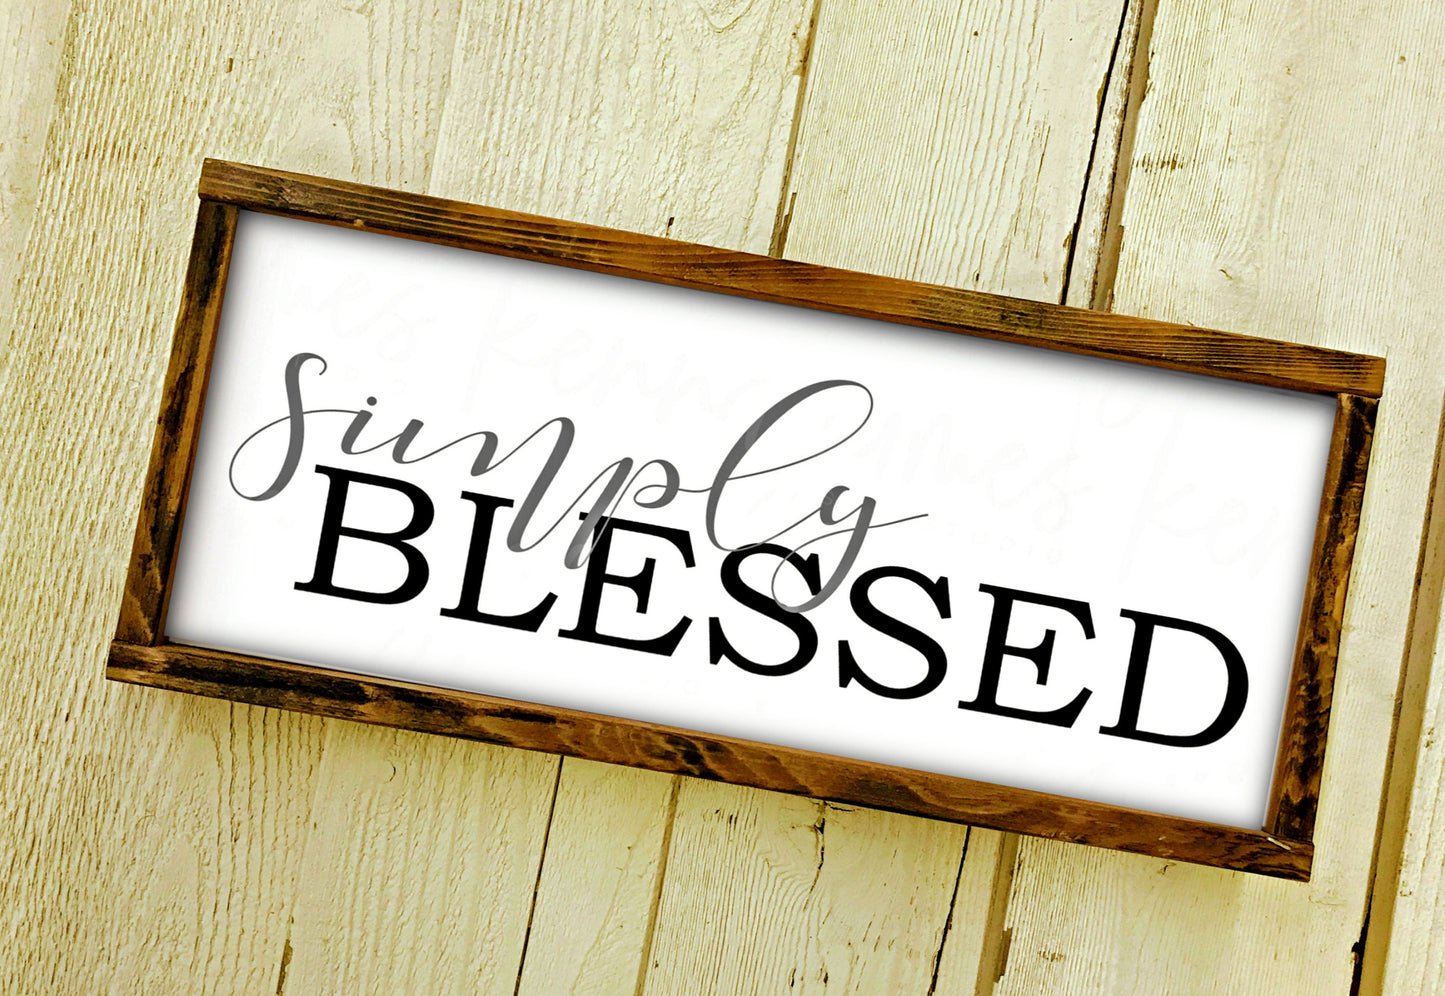 Simply Blessed, Wood sign, Painted wood sign, Inspirational wood sign, Farmhouse decor, Farmhouse style, Wall decor, Gallery wall decor